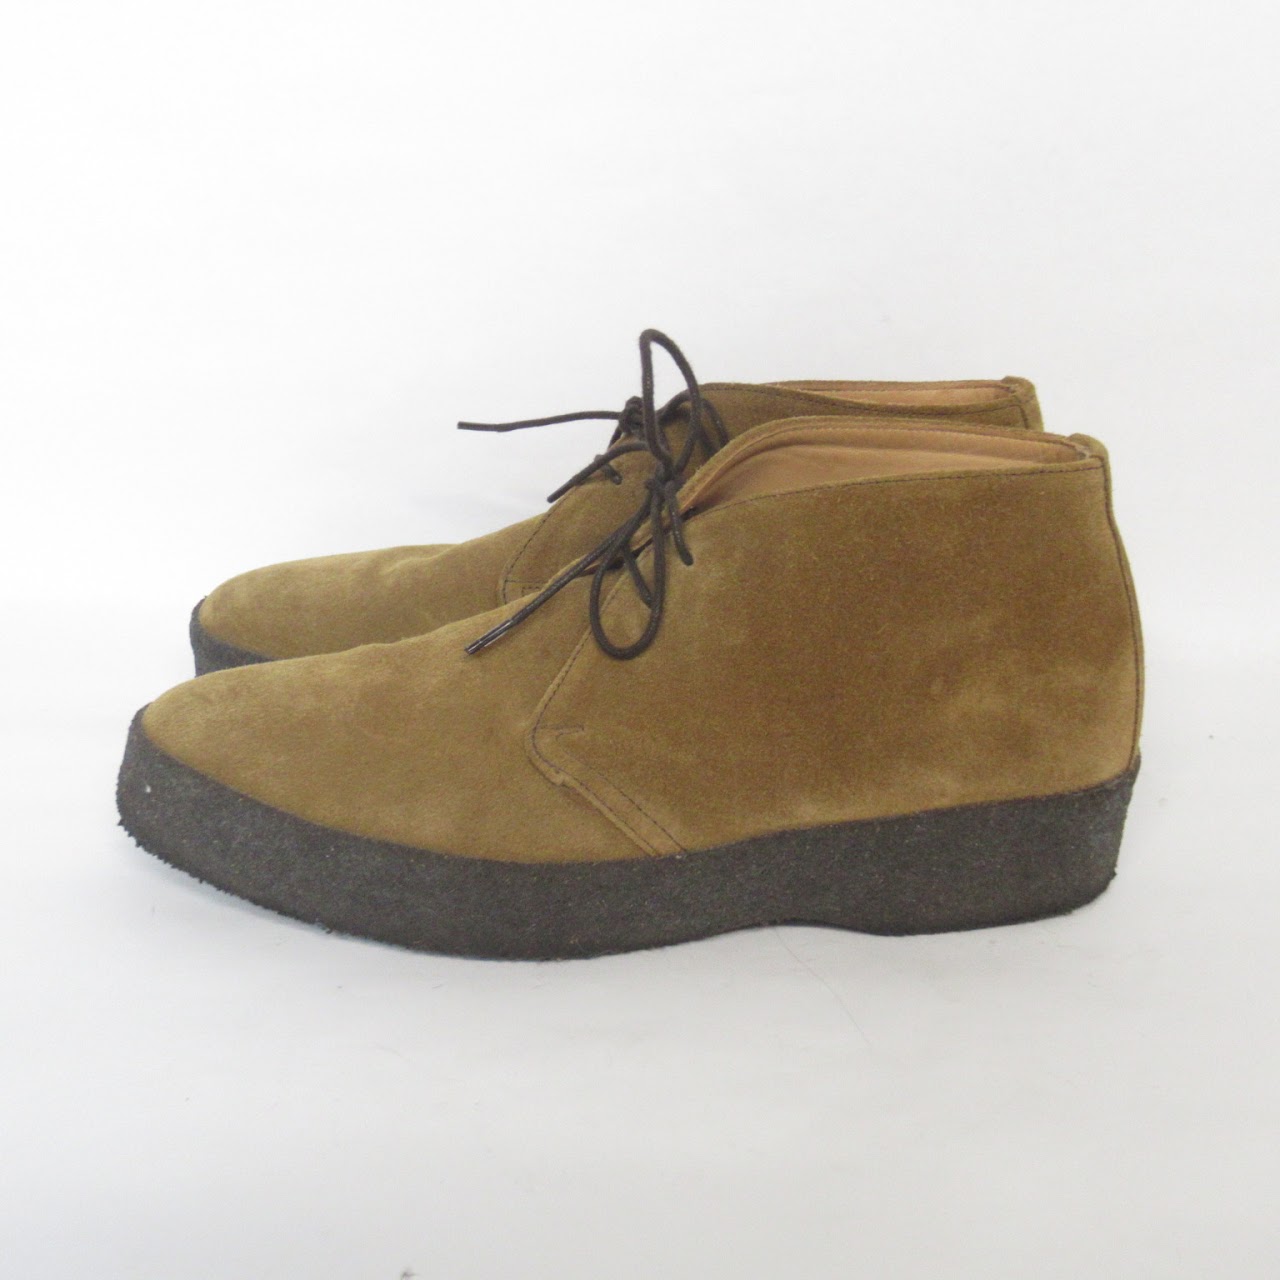 Sanders Suede Leather Chukka Boots